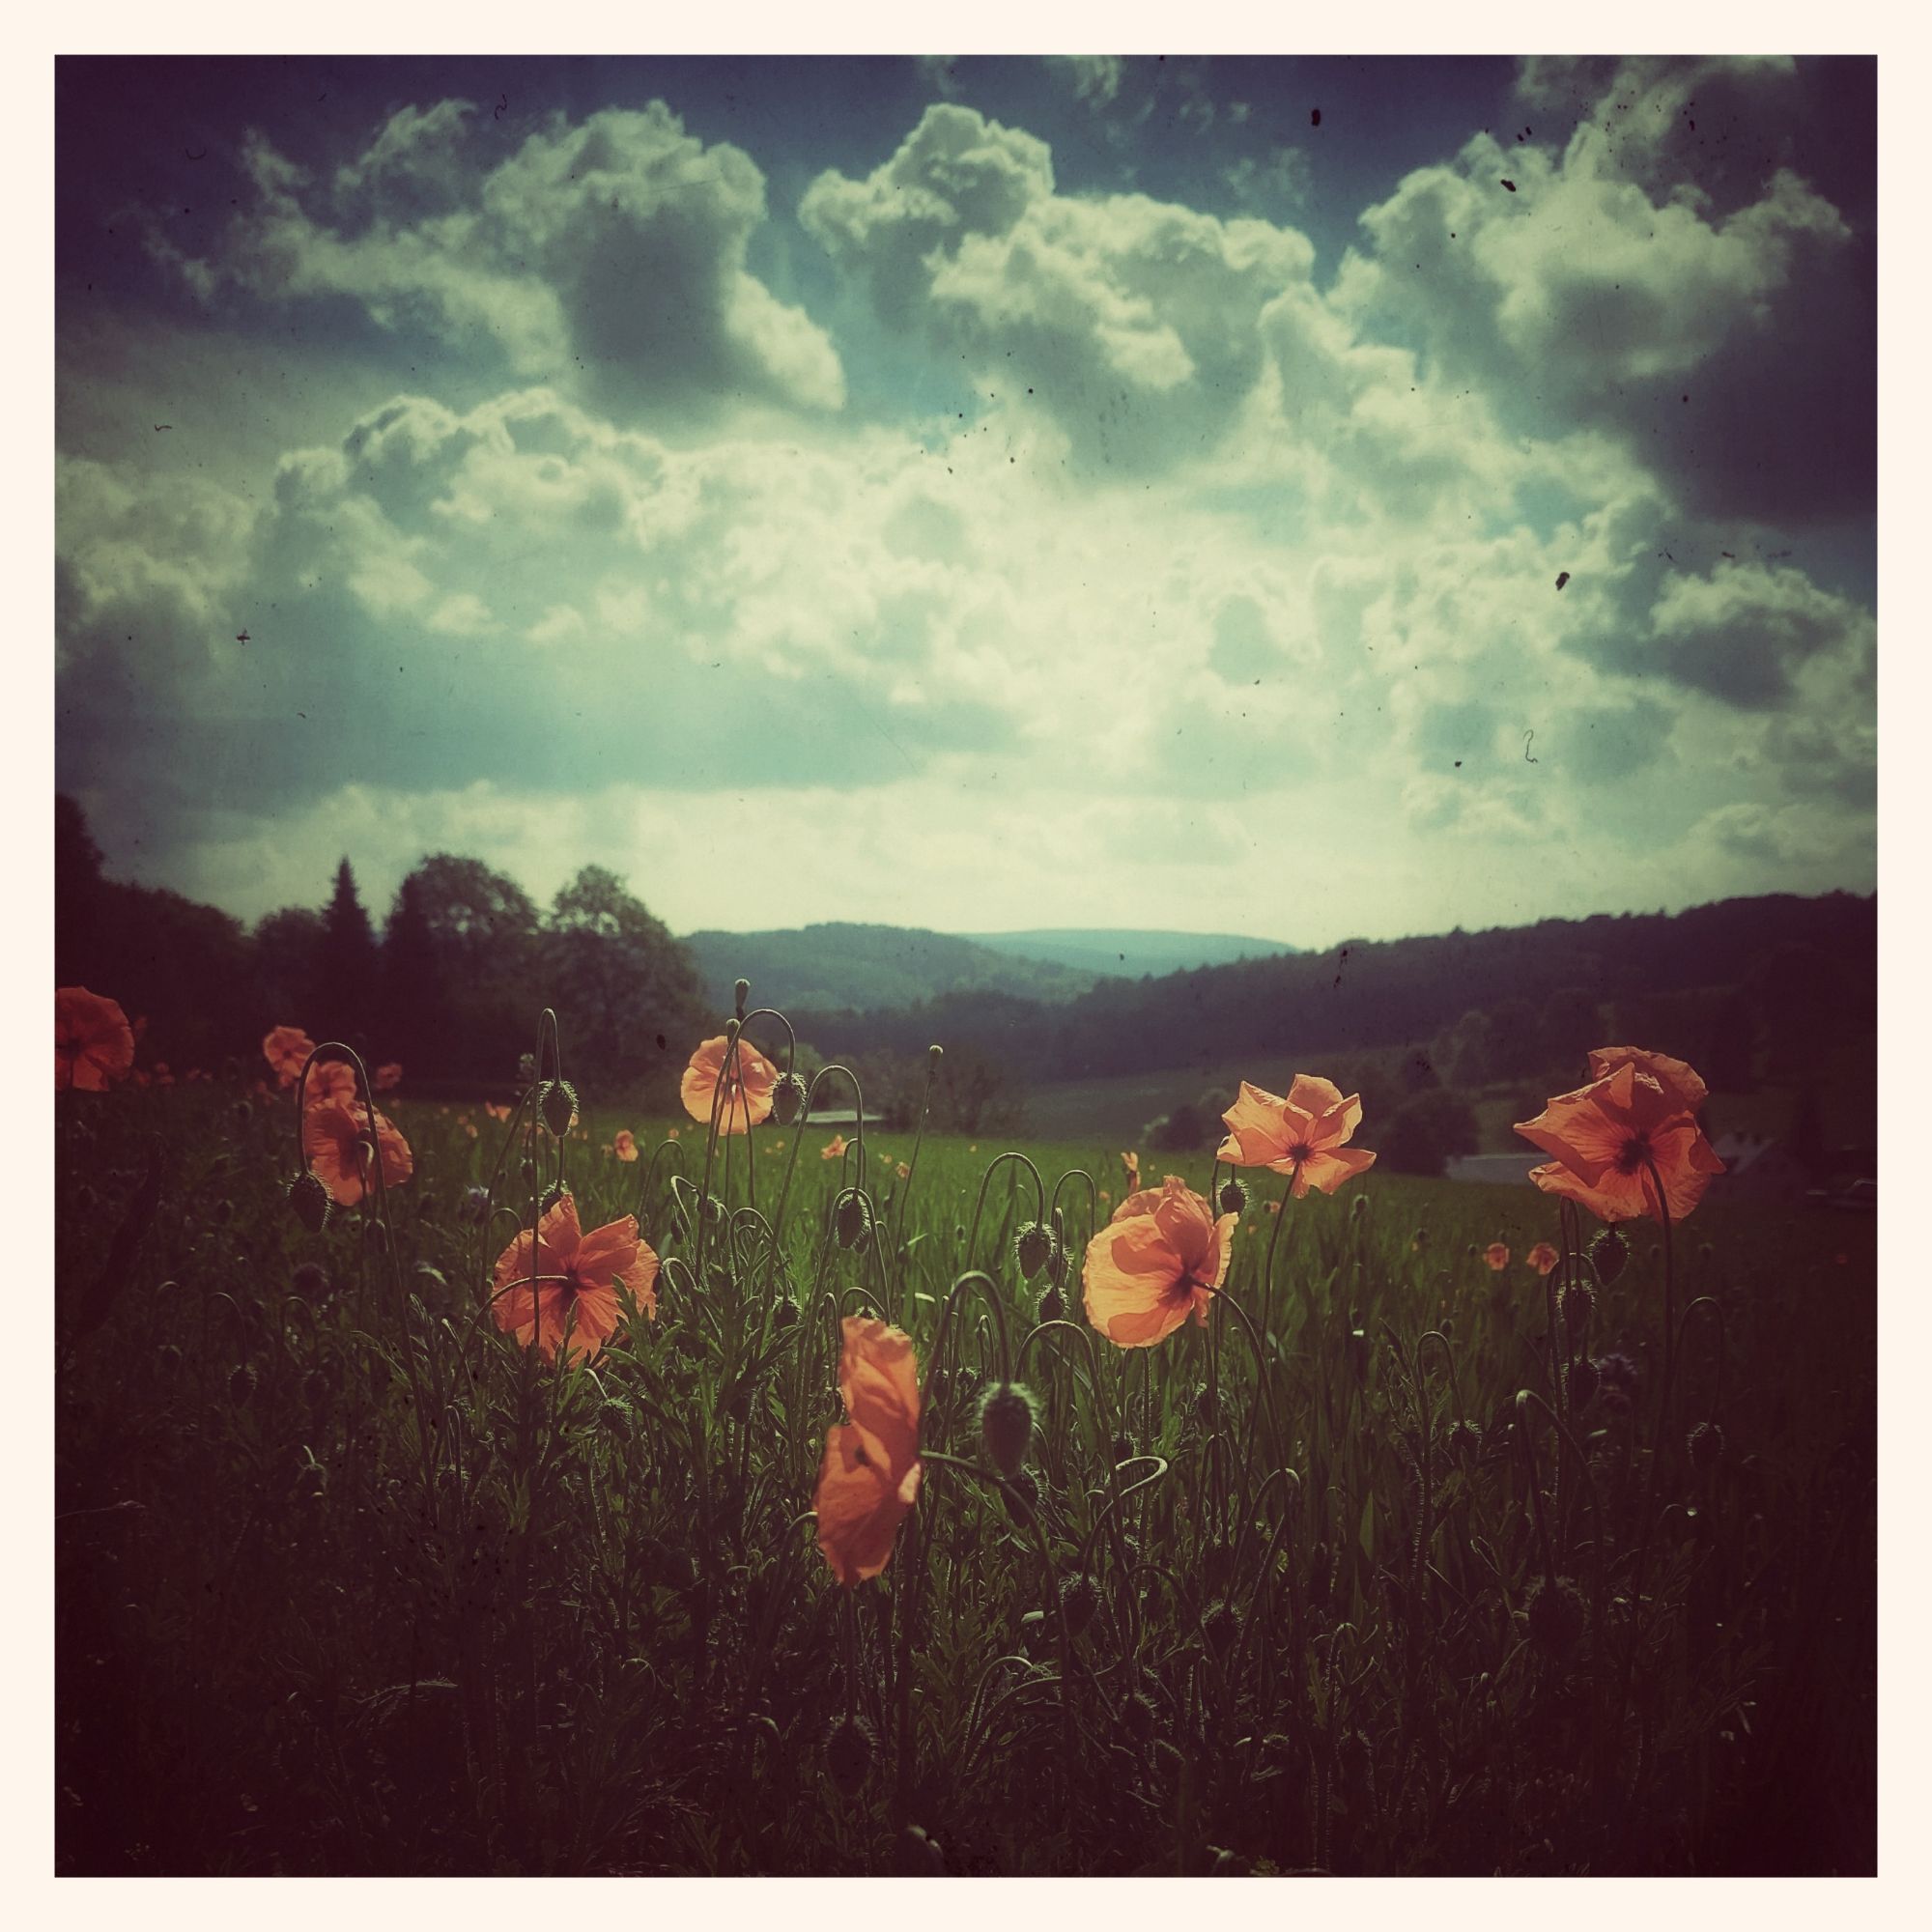 Early poppies in a dense meadow. Wild clouds above.